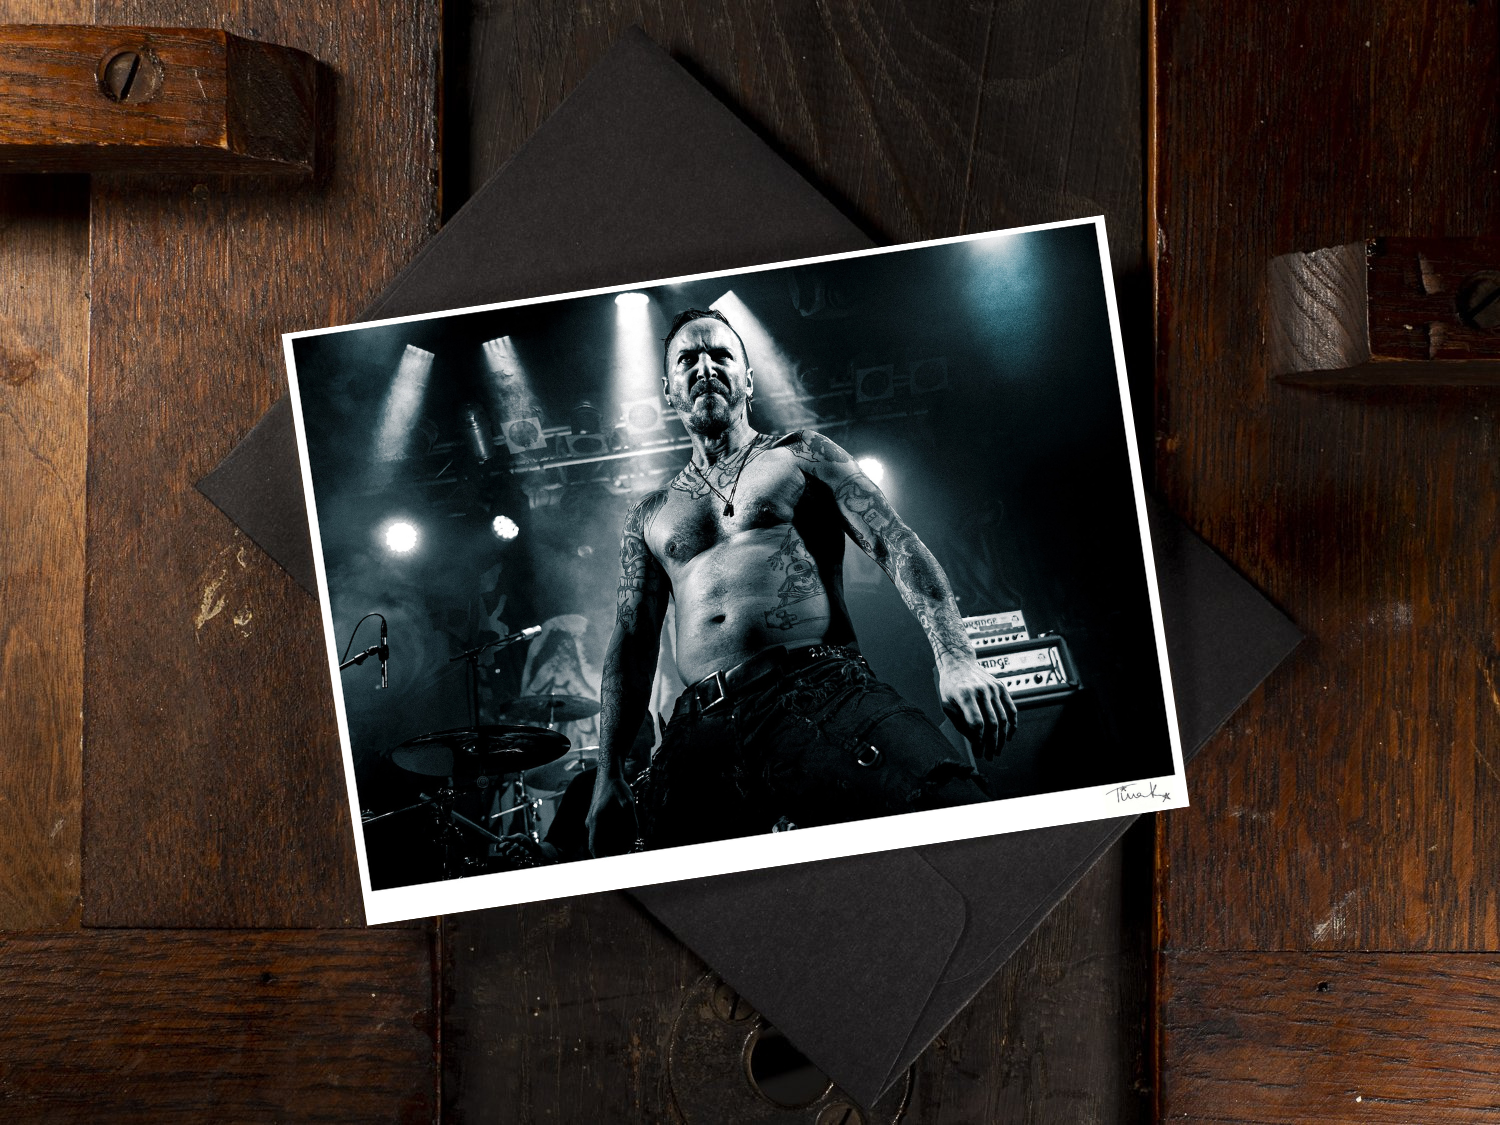 Hand printed greeting card of Jeff JJ Janiak of Discharge on stage at the Electric Ballroom London, 2019. Black & white print, signed by Tina K Photography.